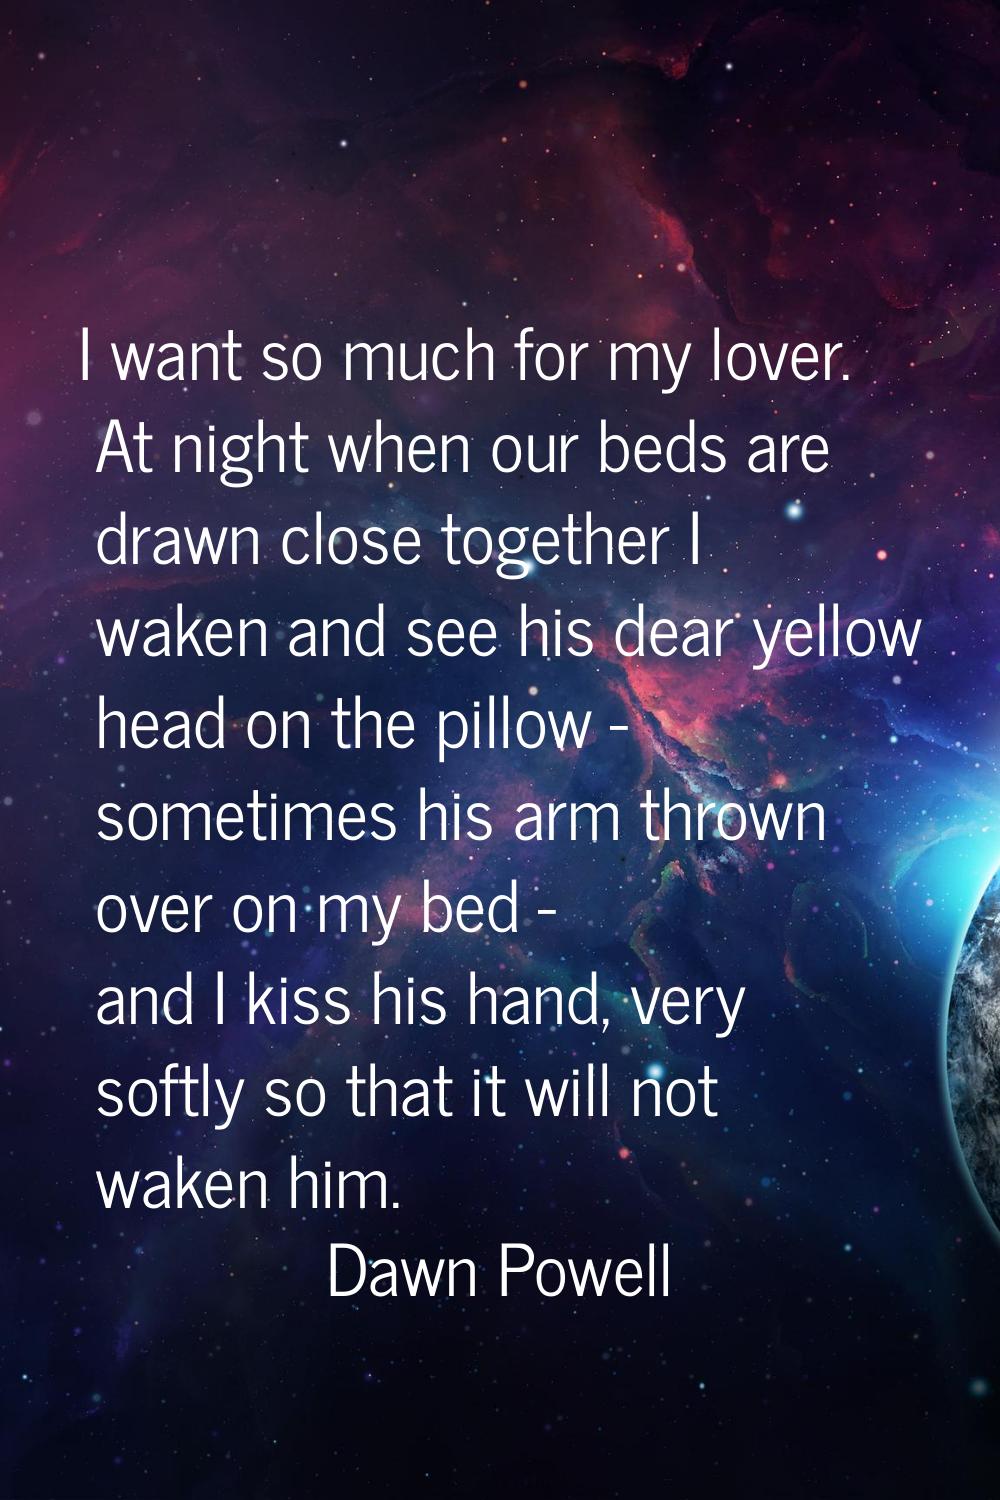 I want so much for my lover. At night when our beds are drawn close together I waken and see his de